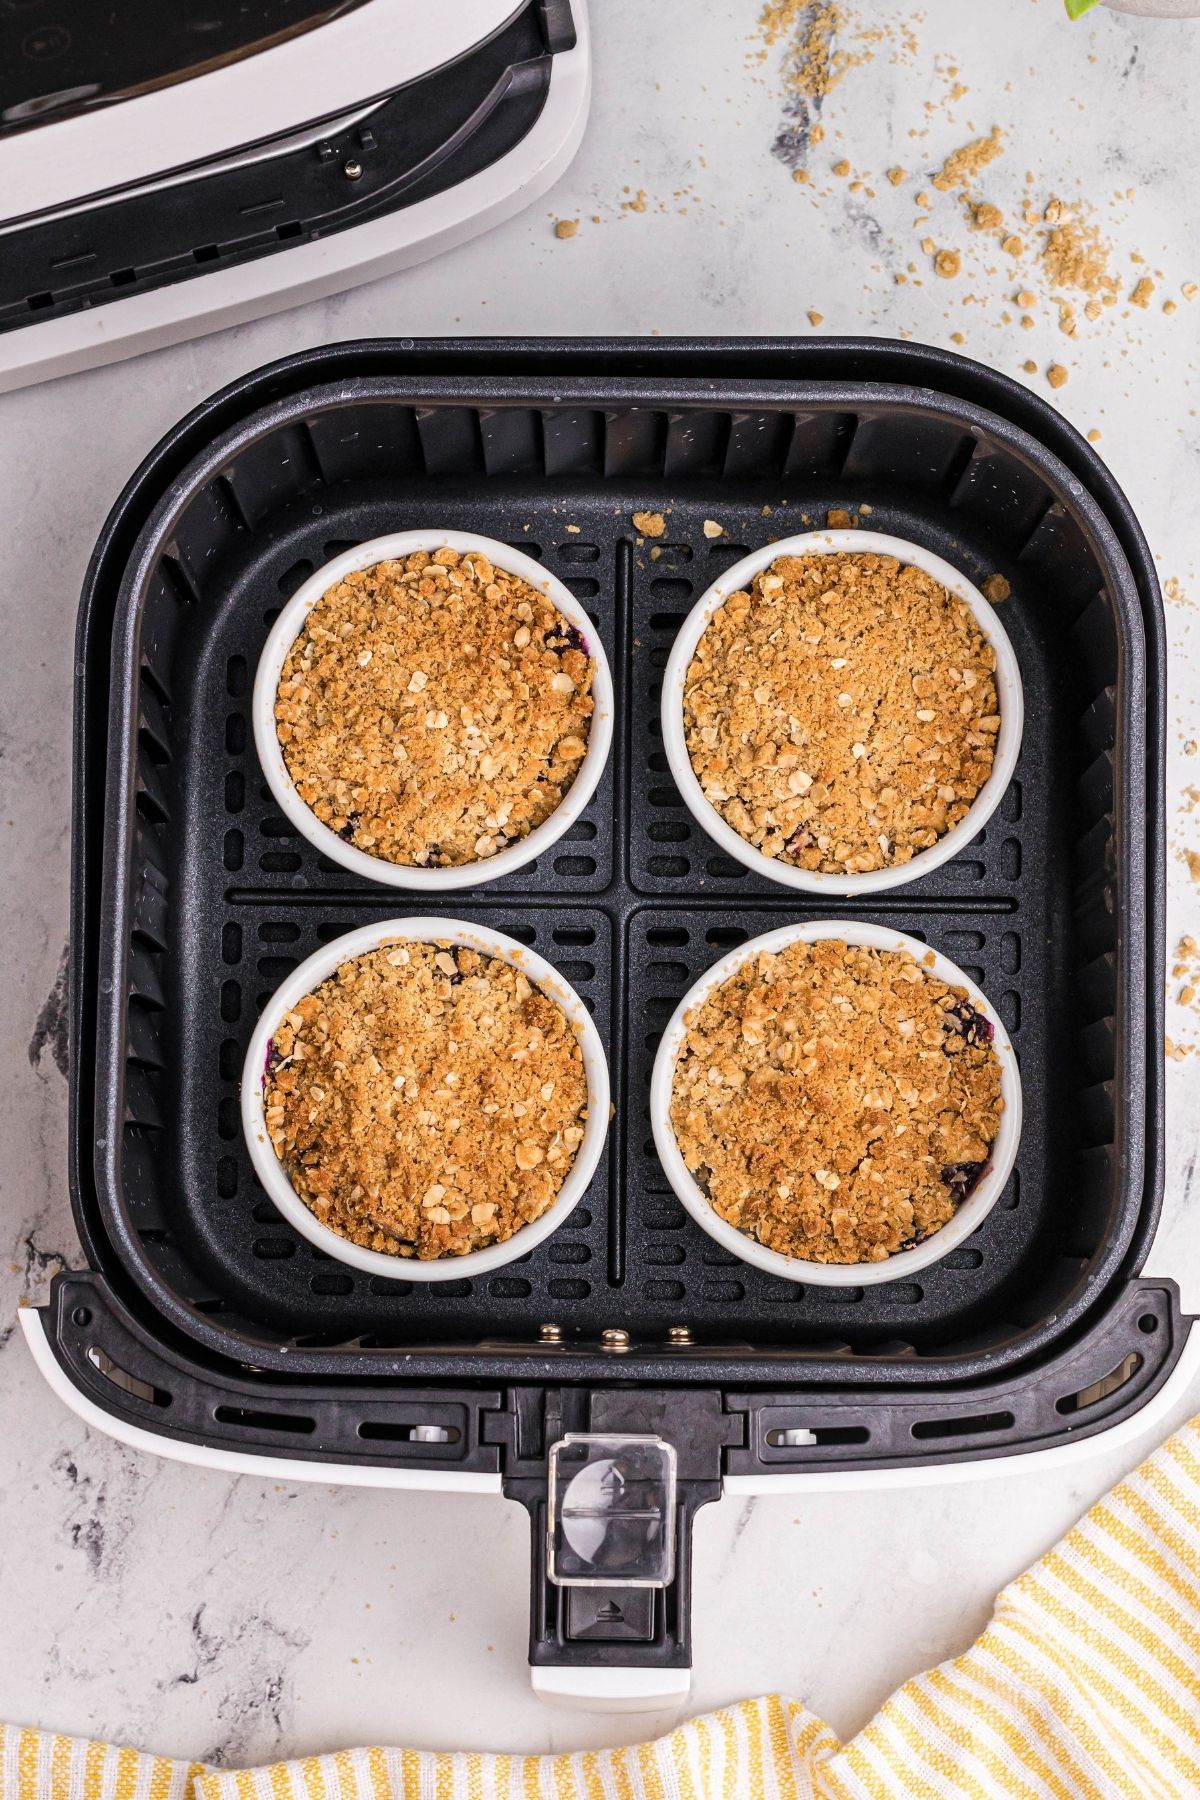 Golden crispy topped blueberry mixture in air fryer basket